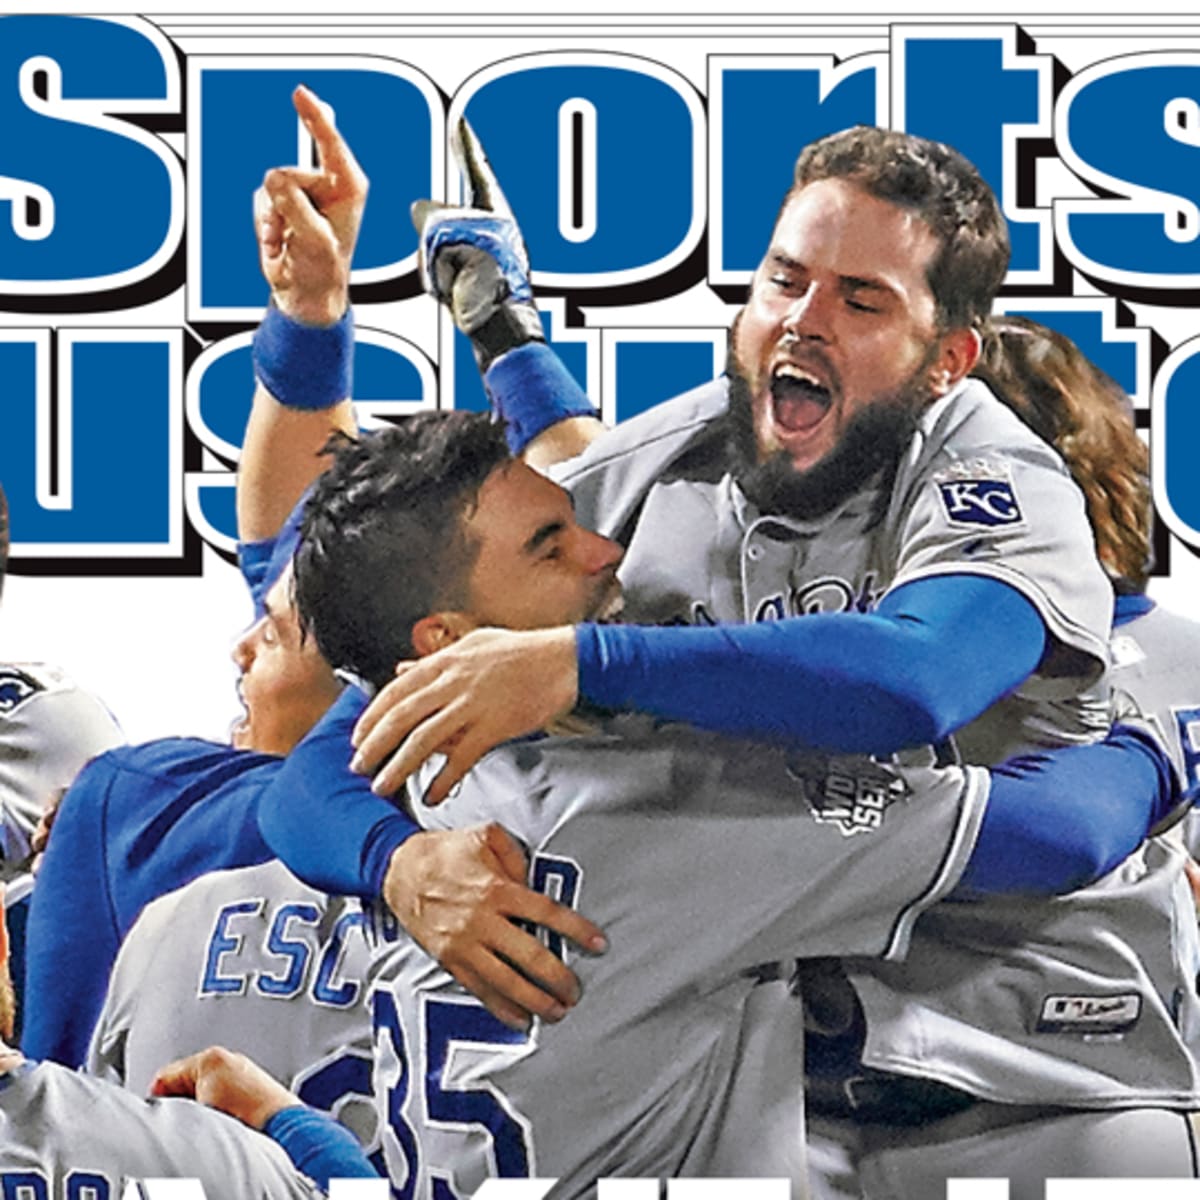 Kansas City Royals on track for worst season ever - Sports Illustrated